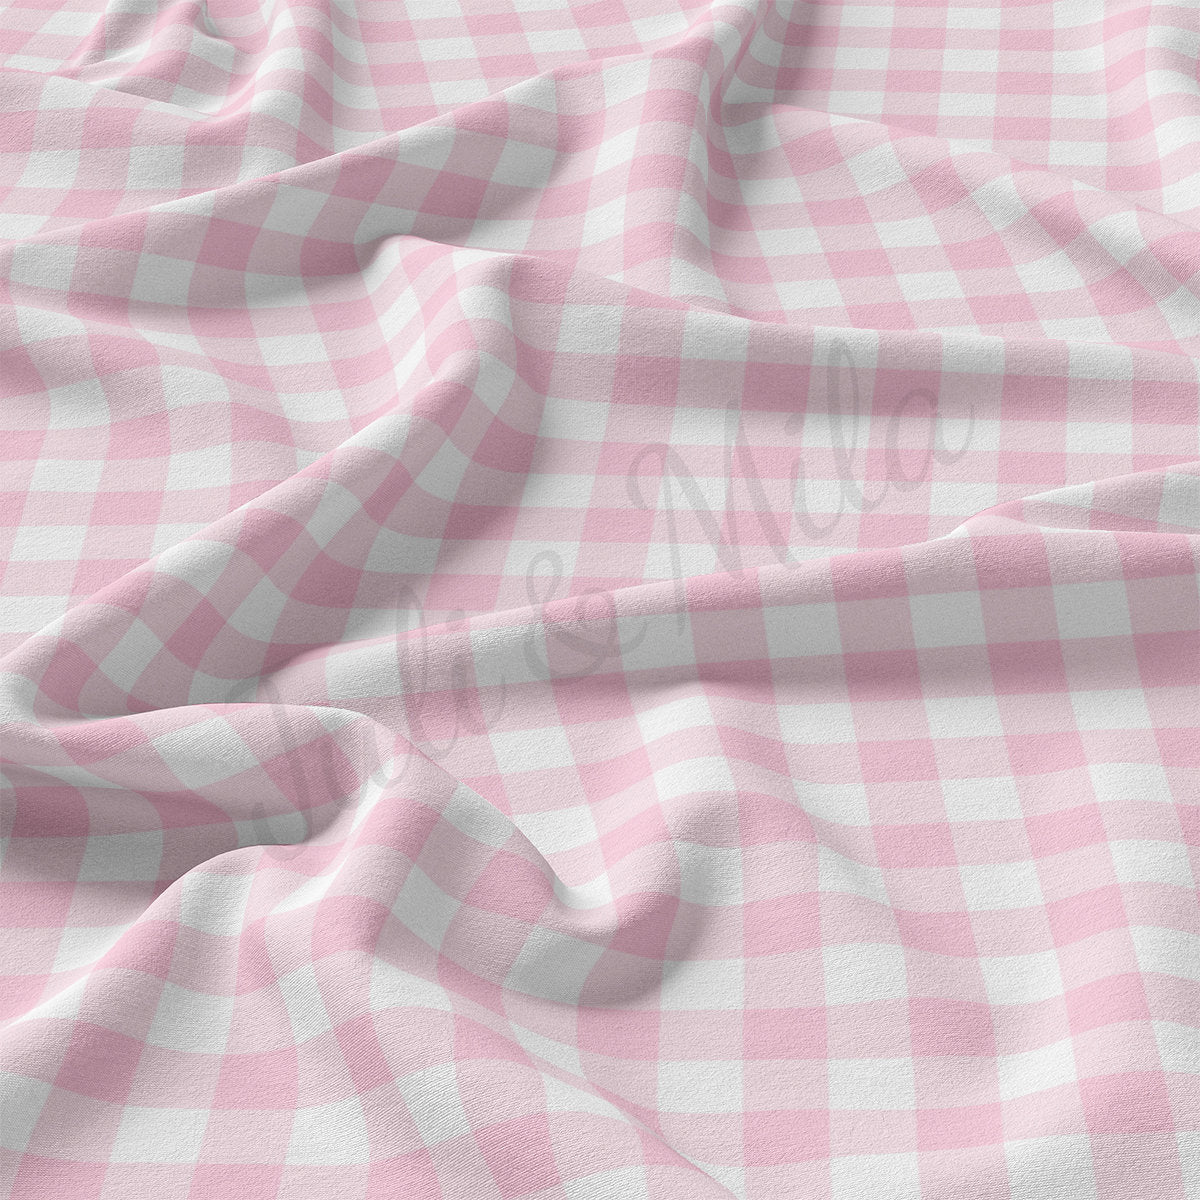 DBP Fabric Double Brushed Polyester DBP2459 Gingham